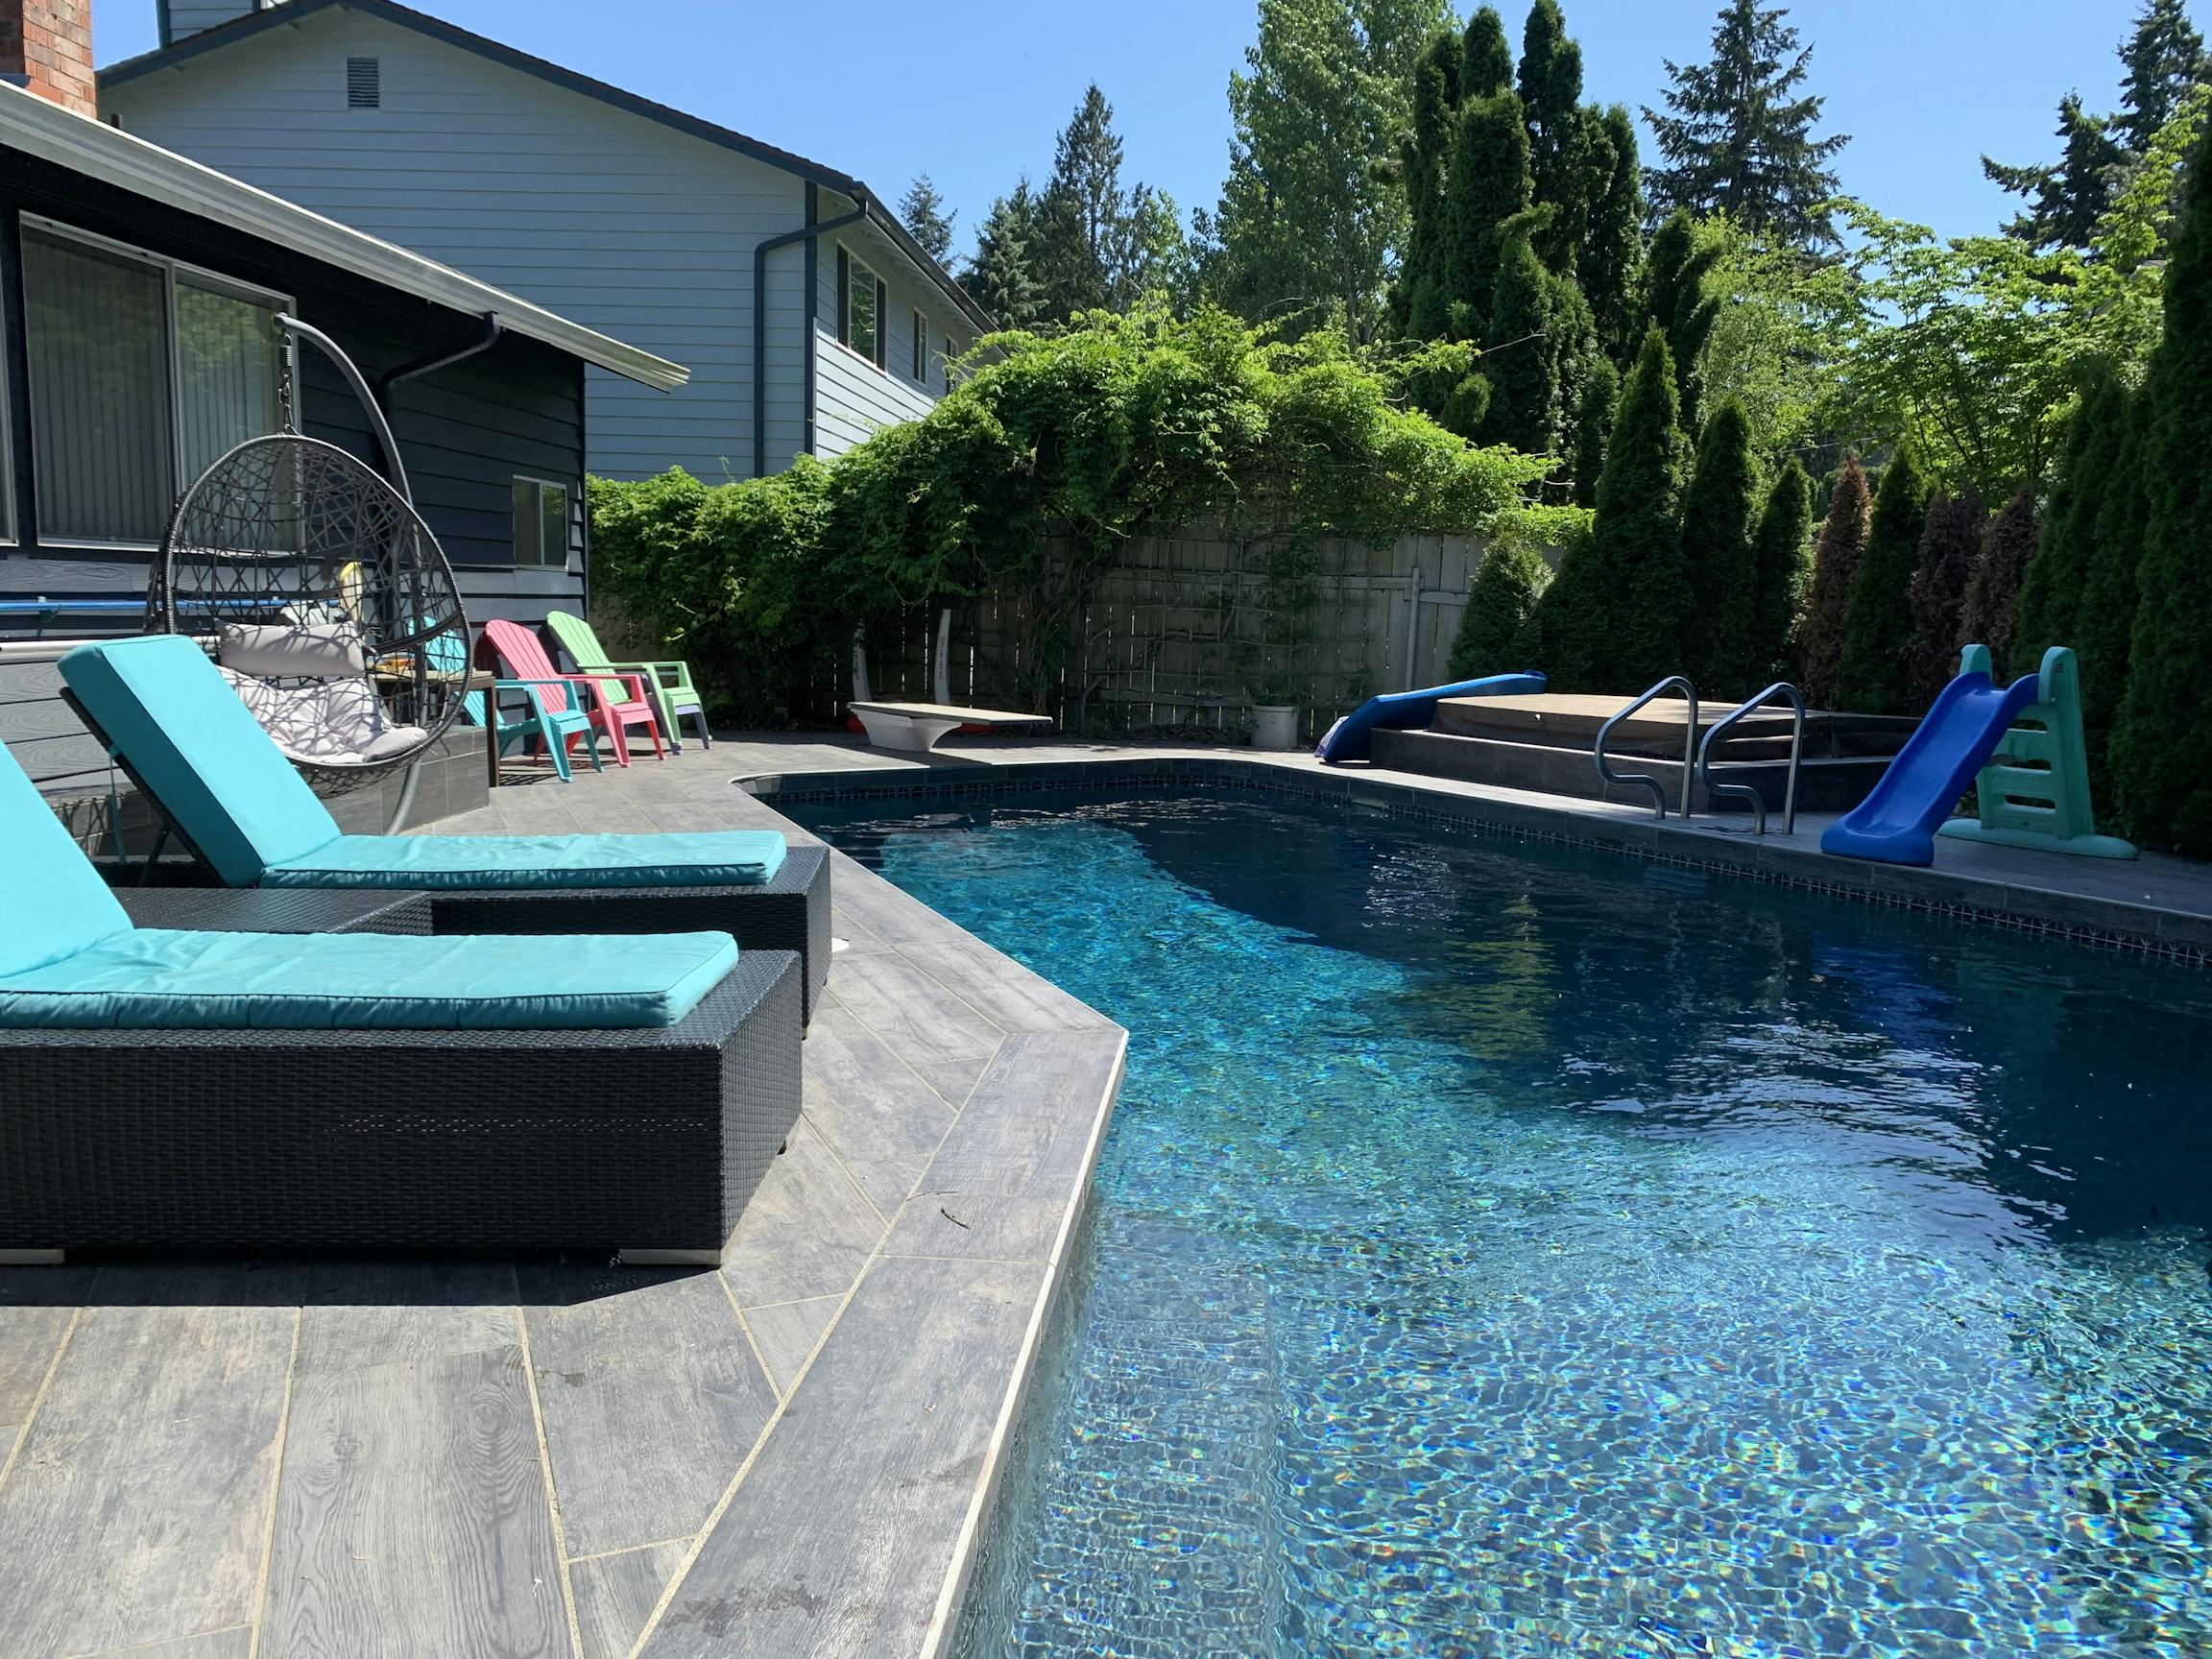 Top 10 Pool Party Venues in Seattle, WA - Swimply